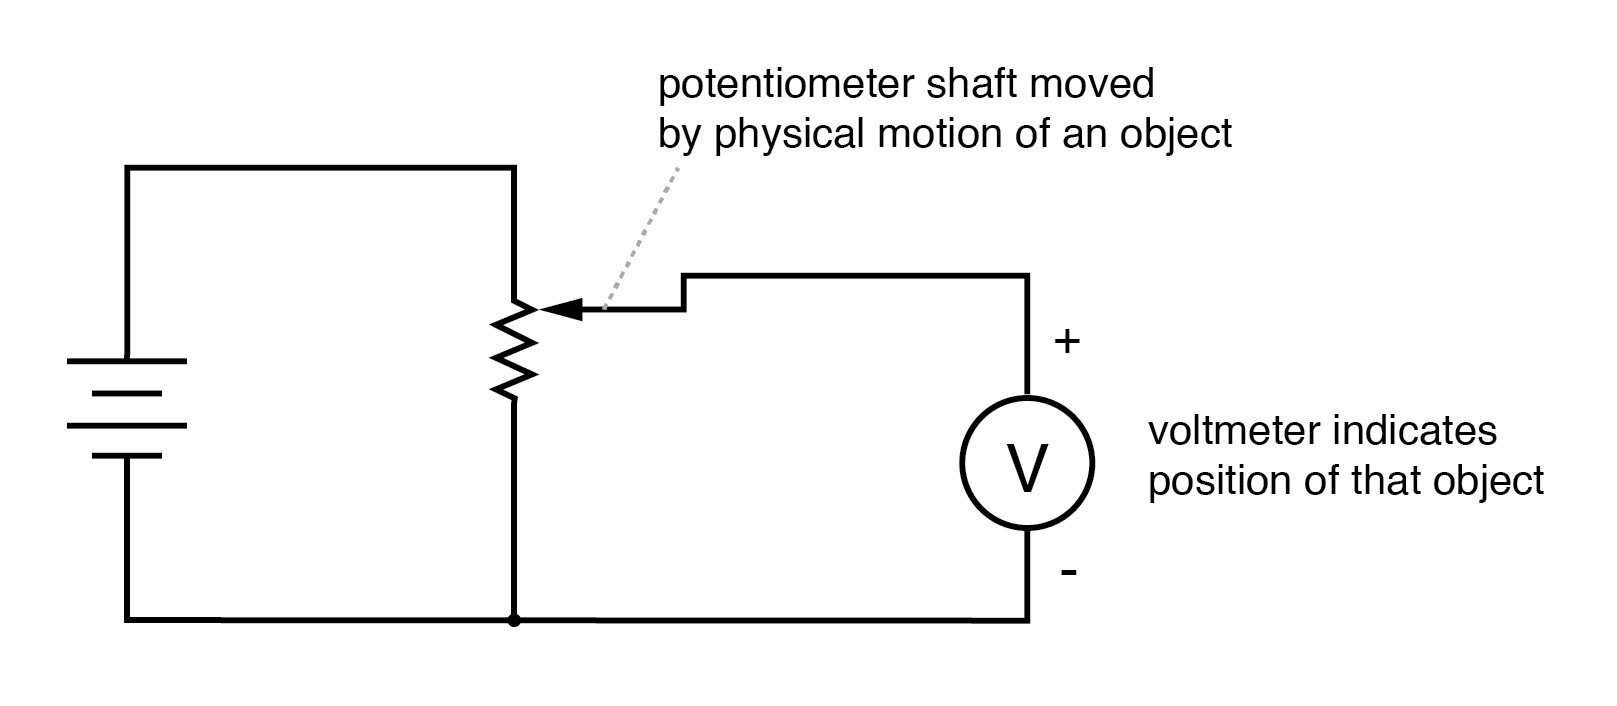 Potentiometer tap voltage indicates position of an object slaved to the shaft.